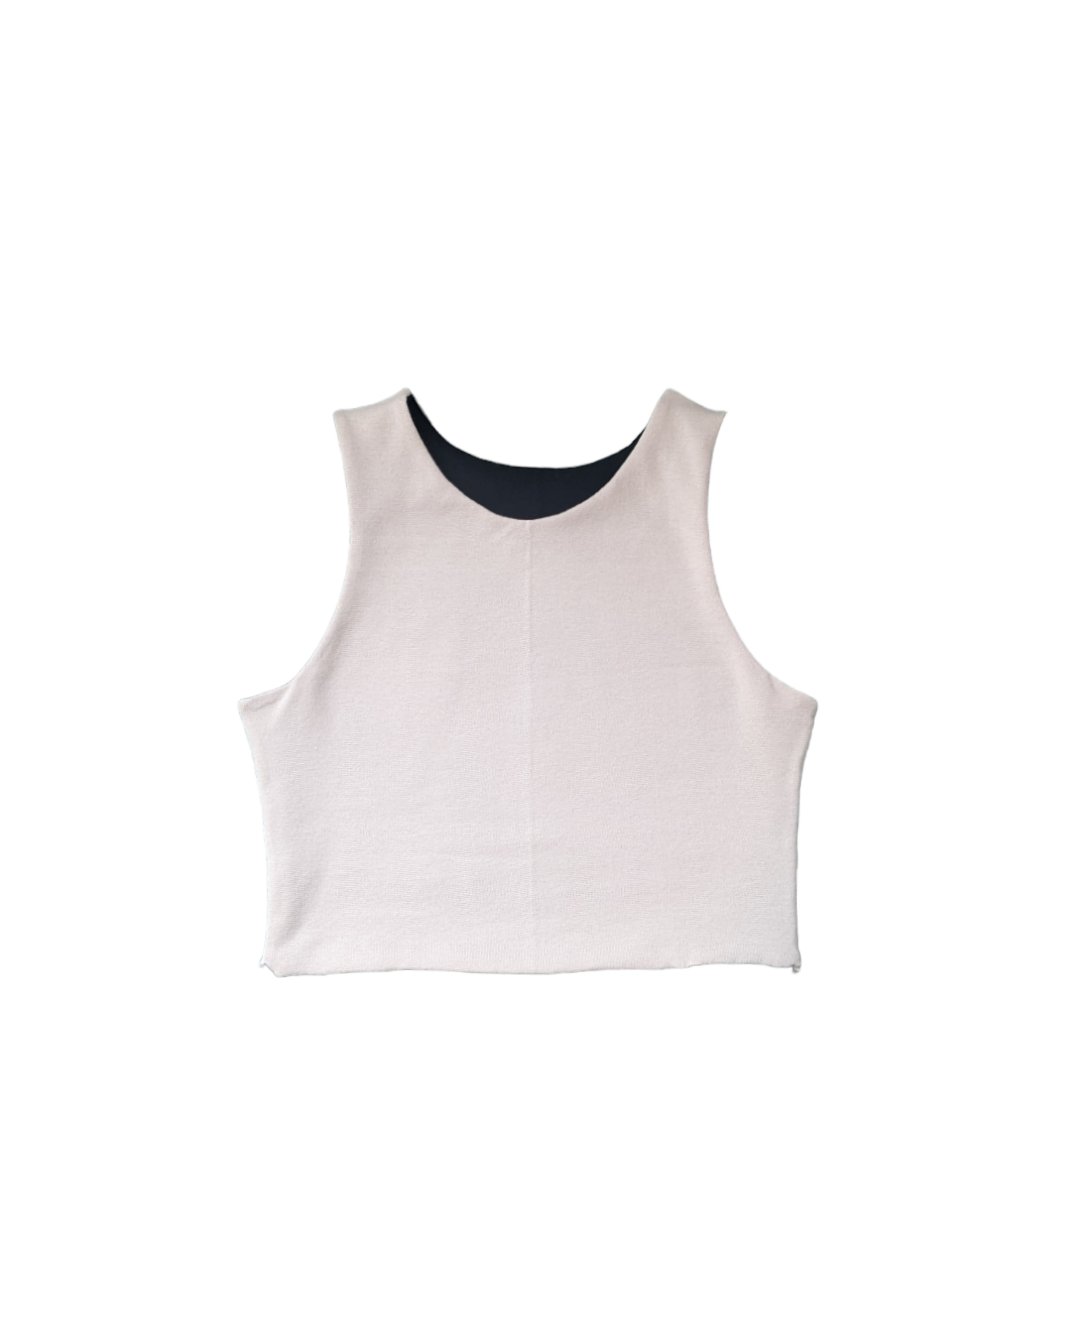 Image of CATCALL: THE REVERSIBLE CROP TOP in STONE